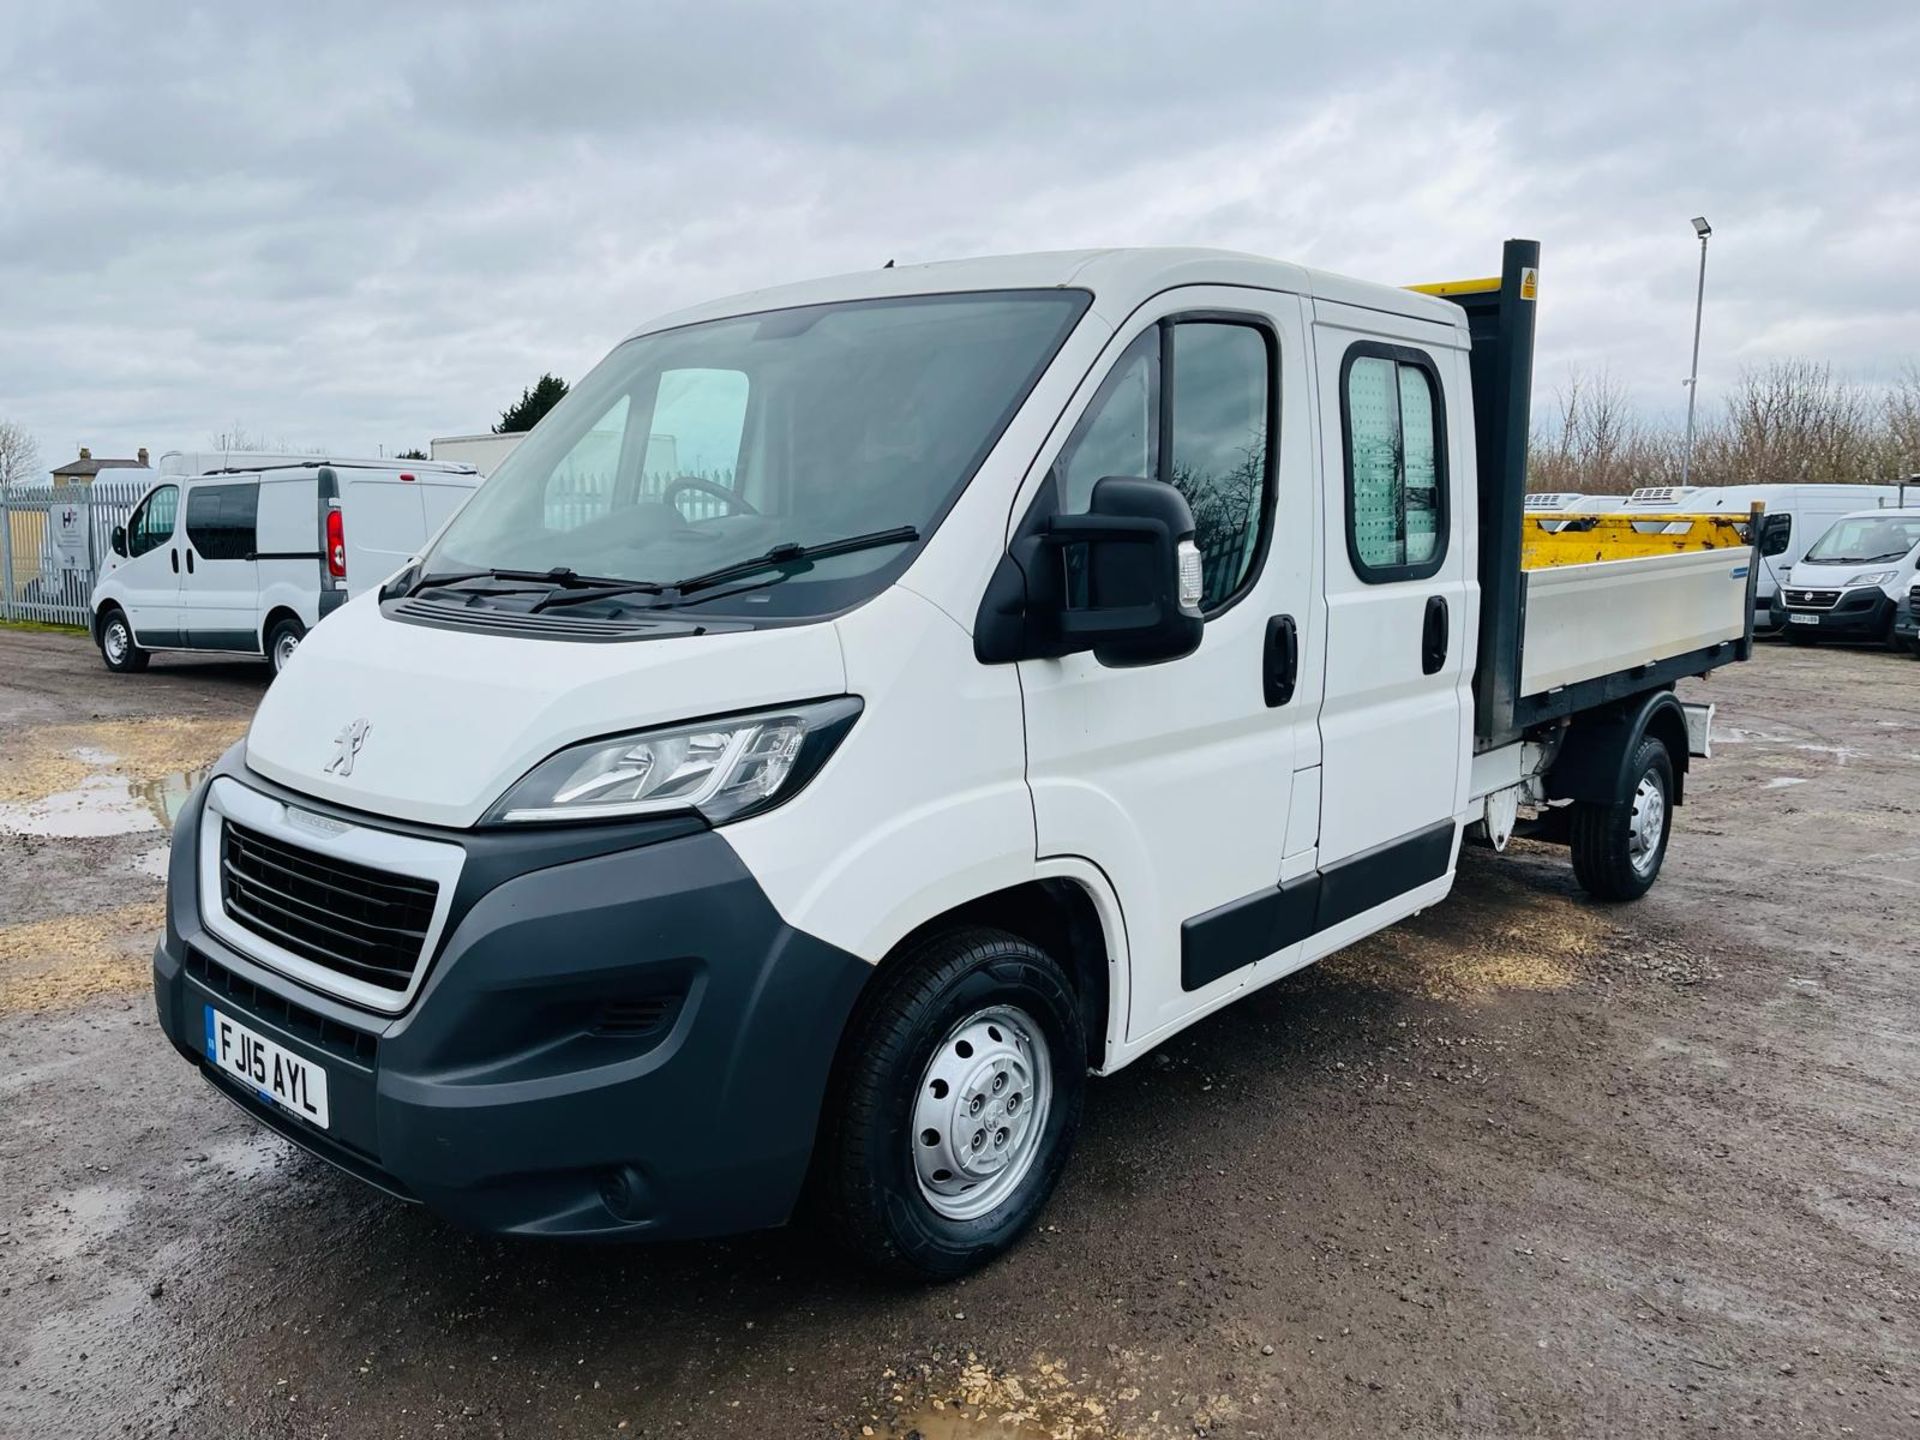 ** ON SALE ** Peugeot Boxer 335 2.2 Hdi 130 L3 CrewCab Tipper 2015 '15 Reg' ONLY 56,897 mile - Image 3 of 31